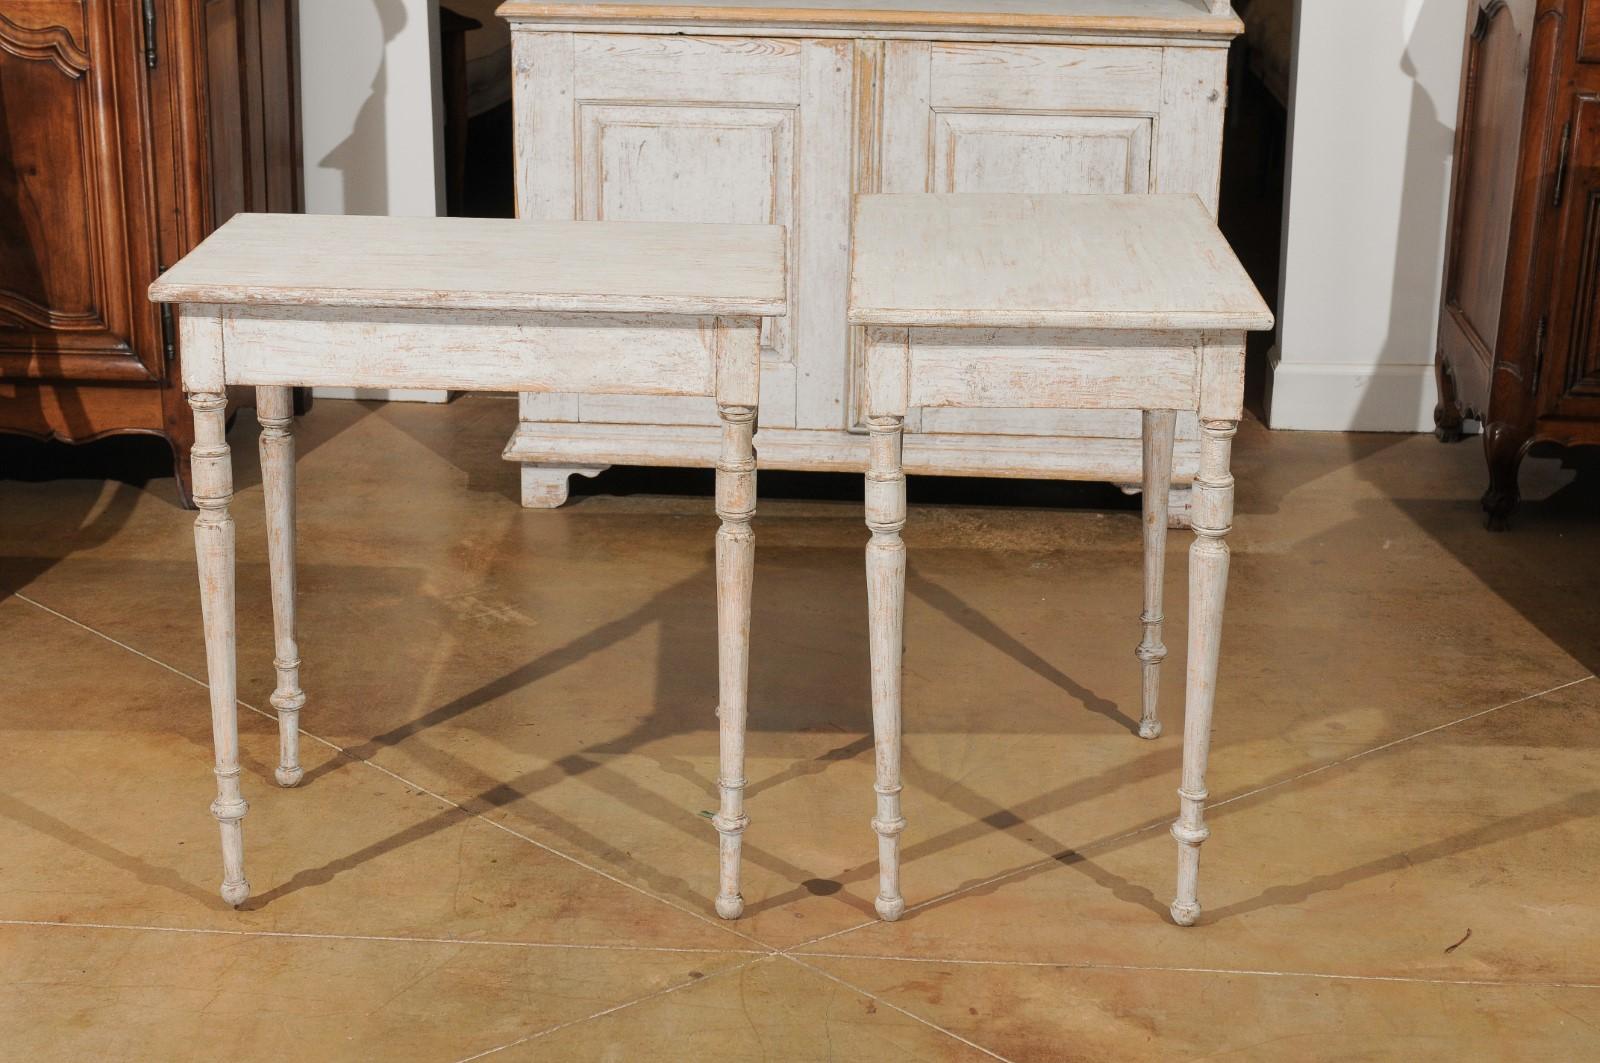 Pair of Swedish 19th Century Tables with Turned Legs and Distressed Finish 4